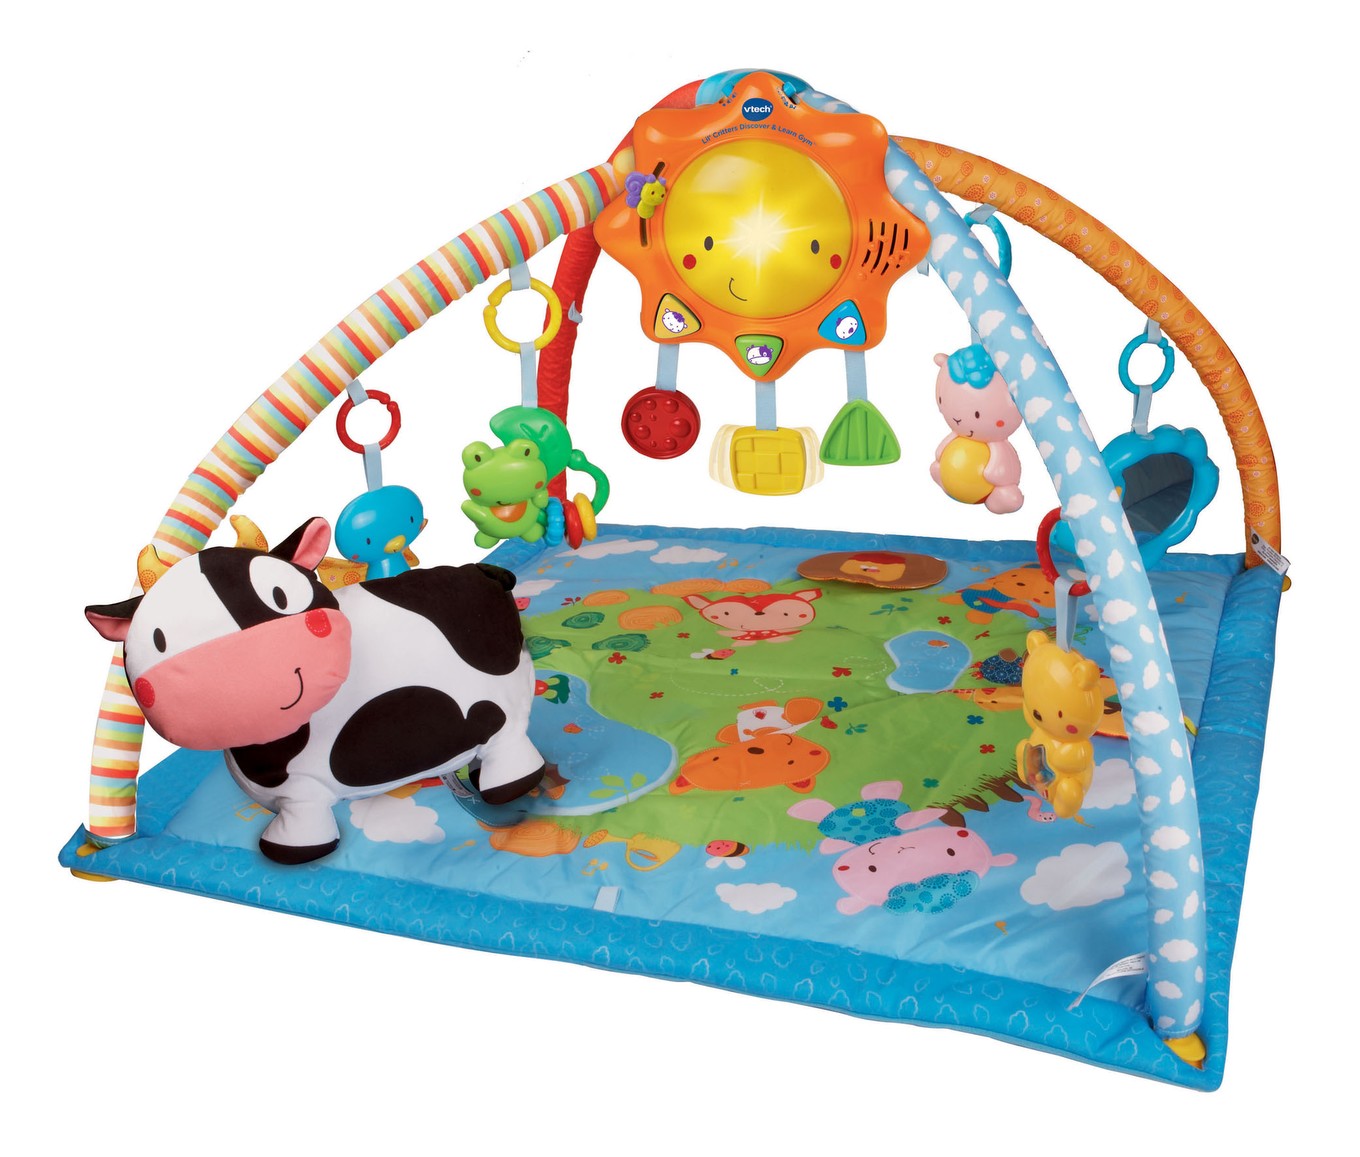 Lil' Critters Discover & Learn Gym І VTechKids.com